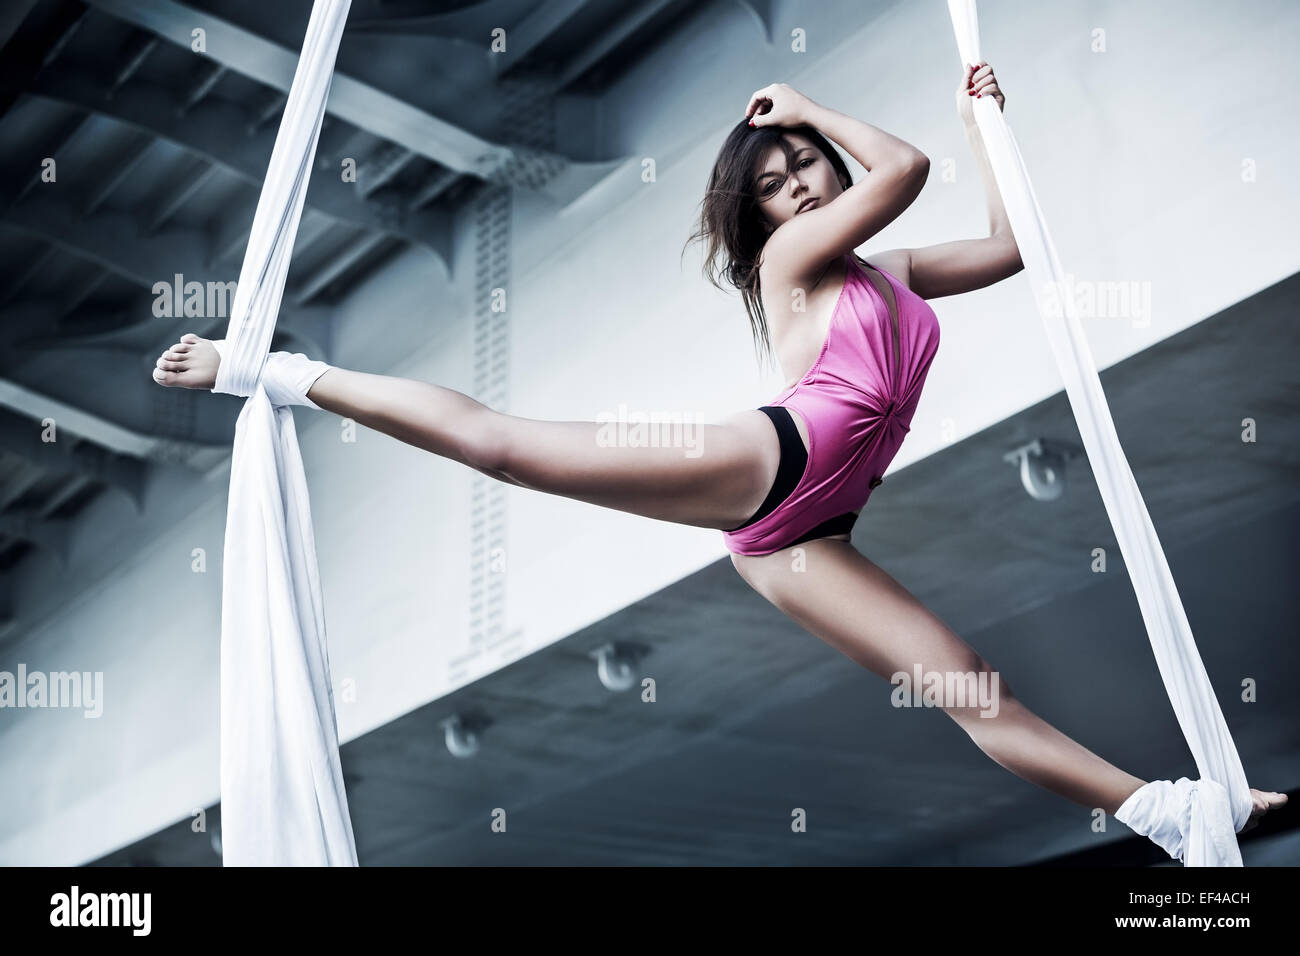 Young woman gymnast. On industrial background. Stock Photo